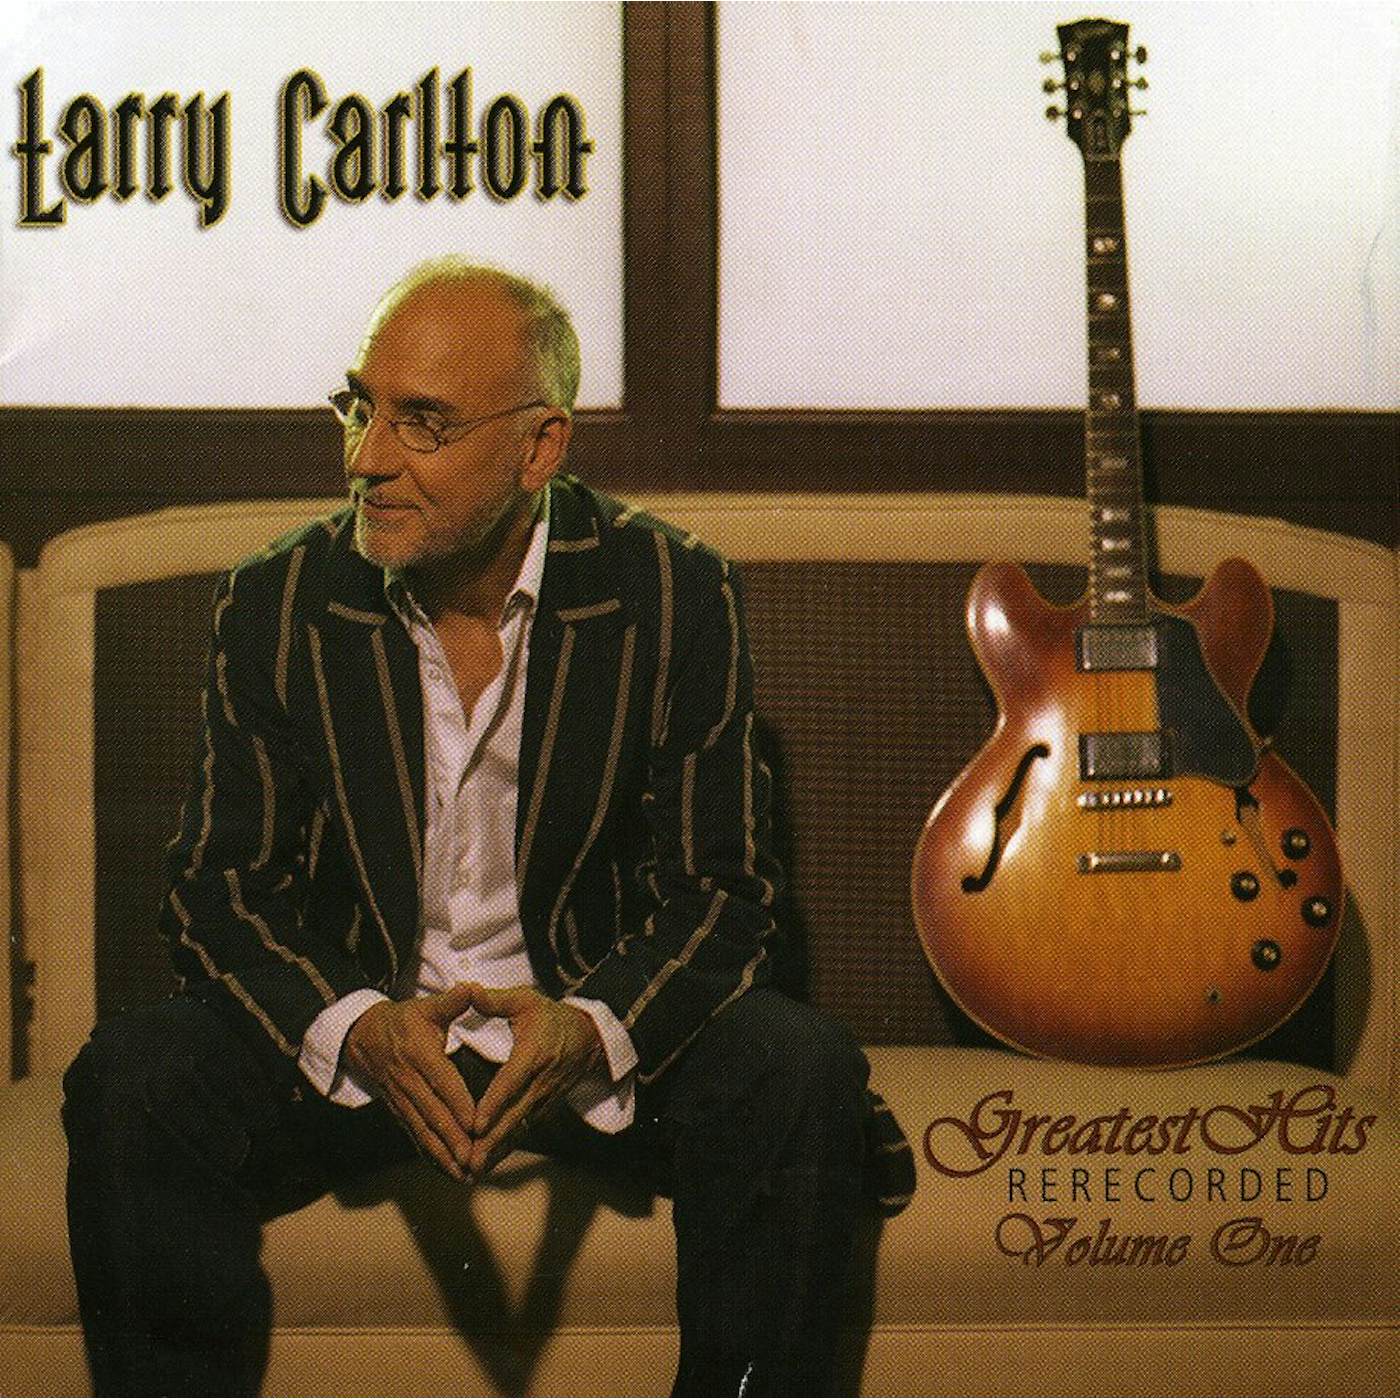 Larry Carlton GREATEST HITS RE-RECORDED 1 CD